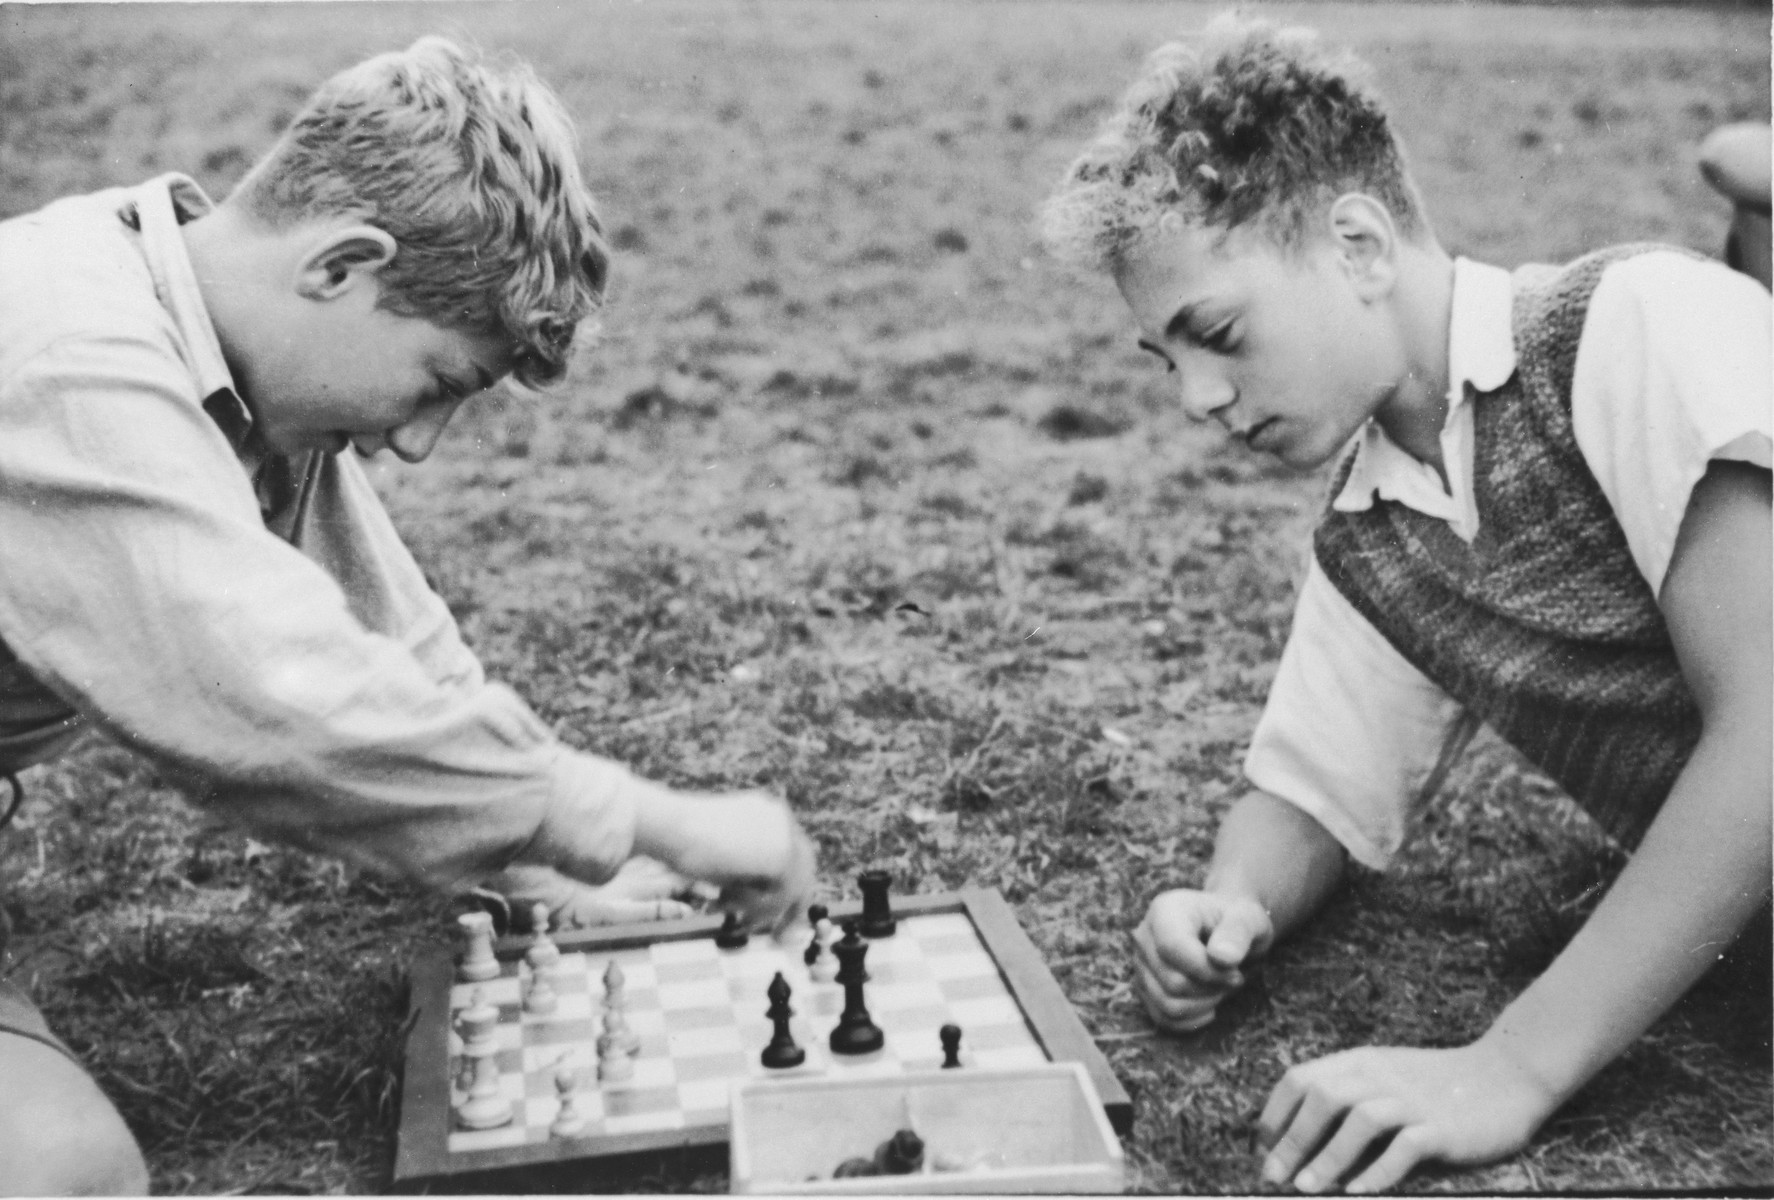 Jewish children from Germany play chess at a Kinderlager [children's recreational summer camp] in Horserod, Denmark. 
 
In 1935-36 Norbert Wollheim was involved in organizing groups of German Jewish youth to attend a summer camp in Denmark.